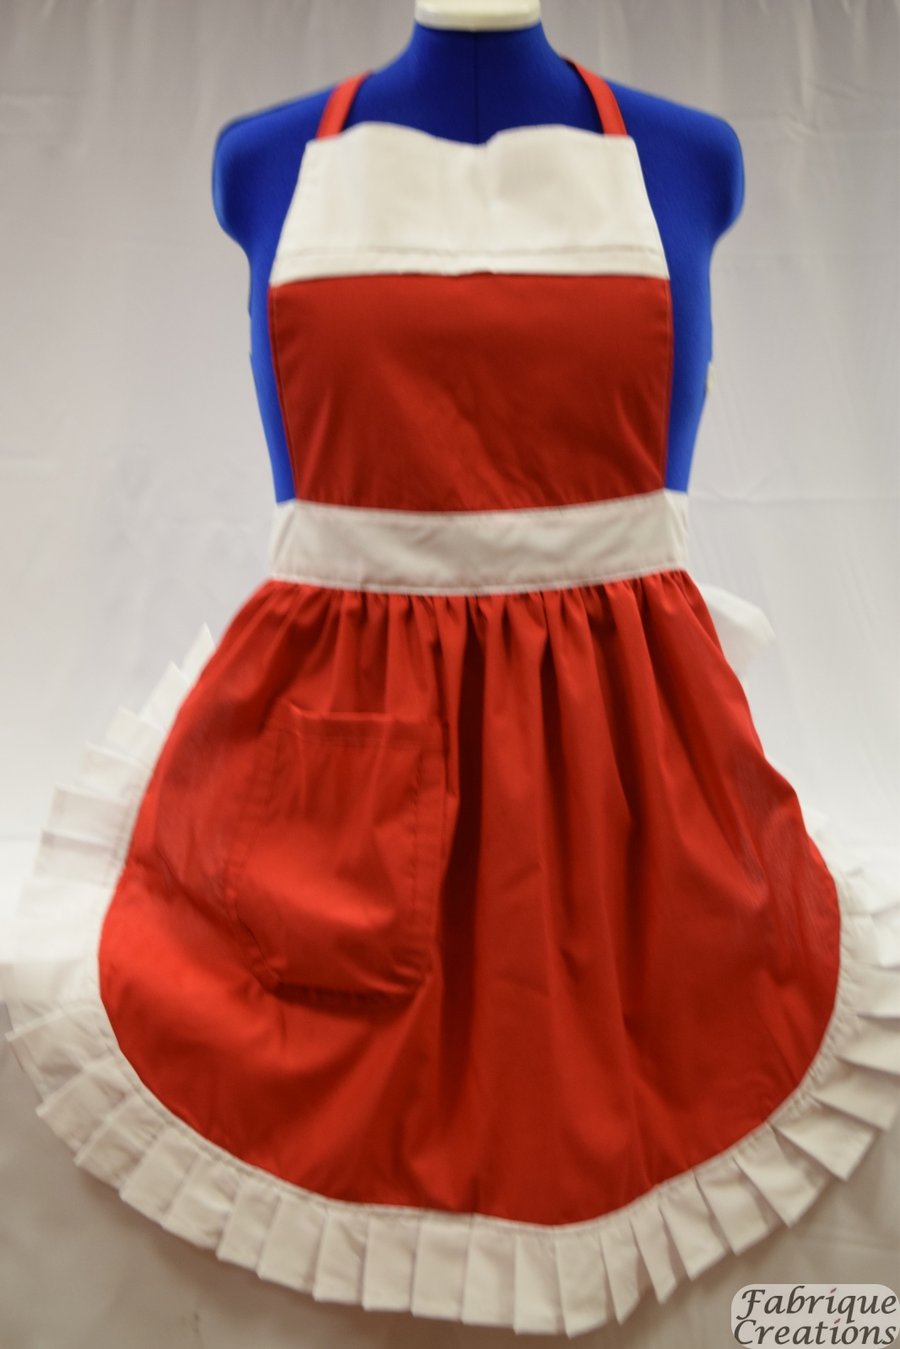 Vintage 50s Style Full Apron Pinny - Red with White Trim